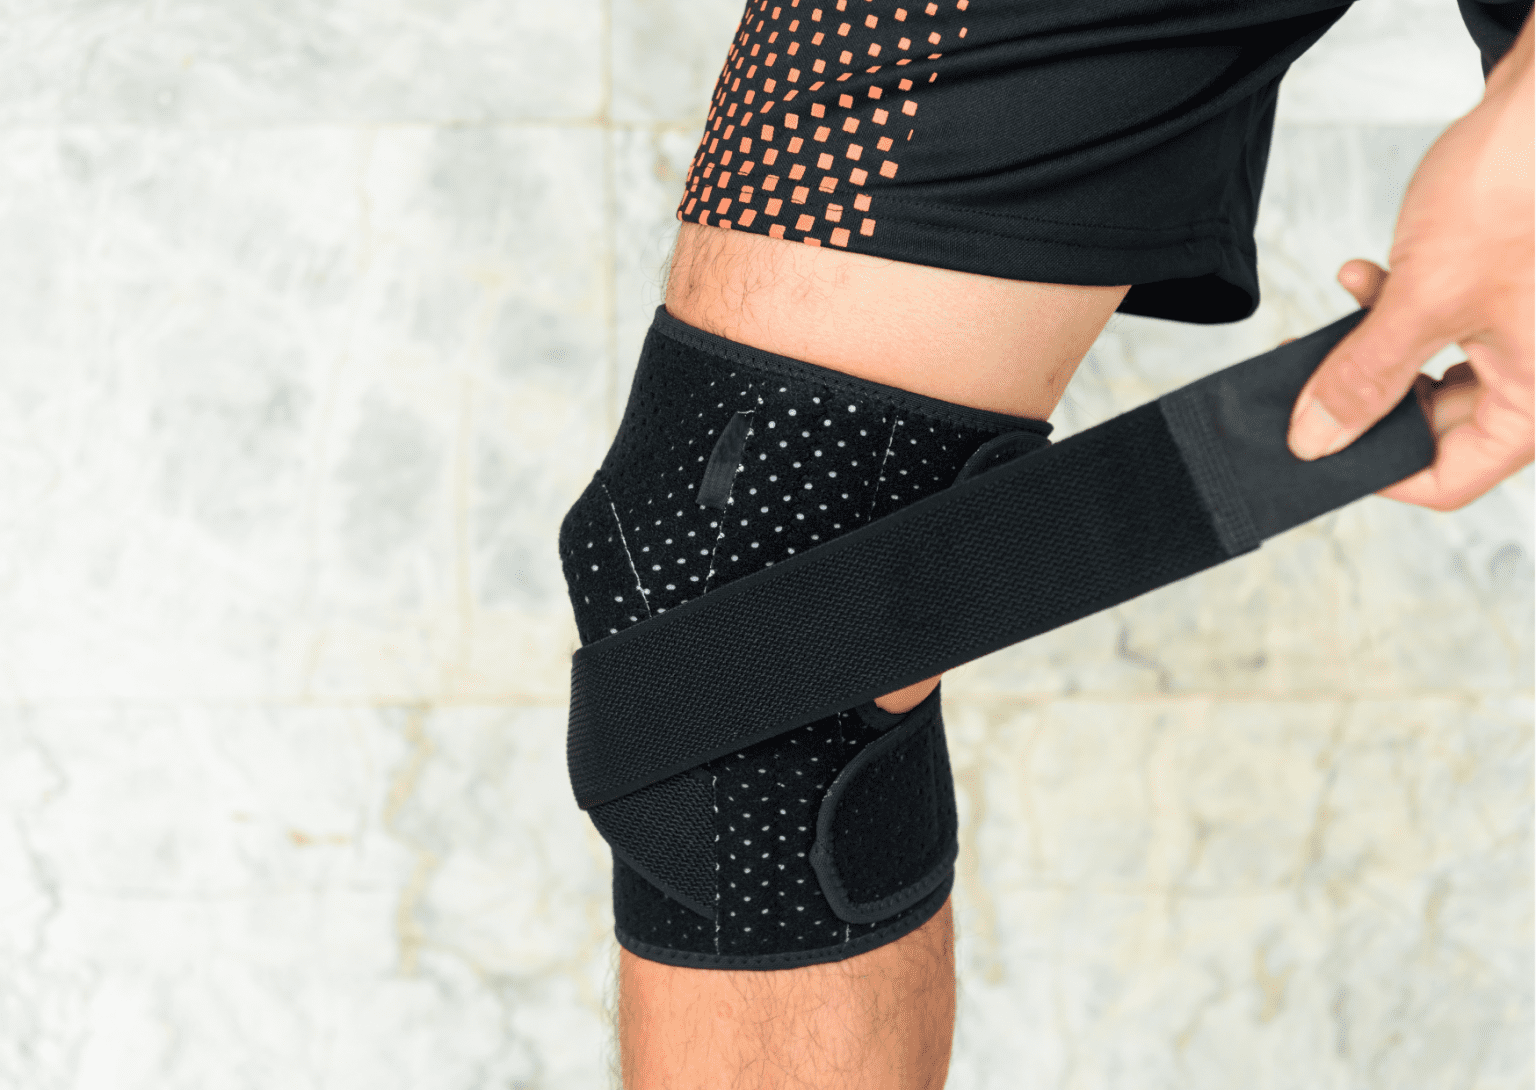 Scooter Knee Pads: For Fun And Safe Scooting - FamilyHype